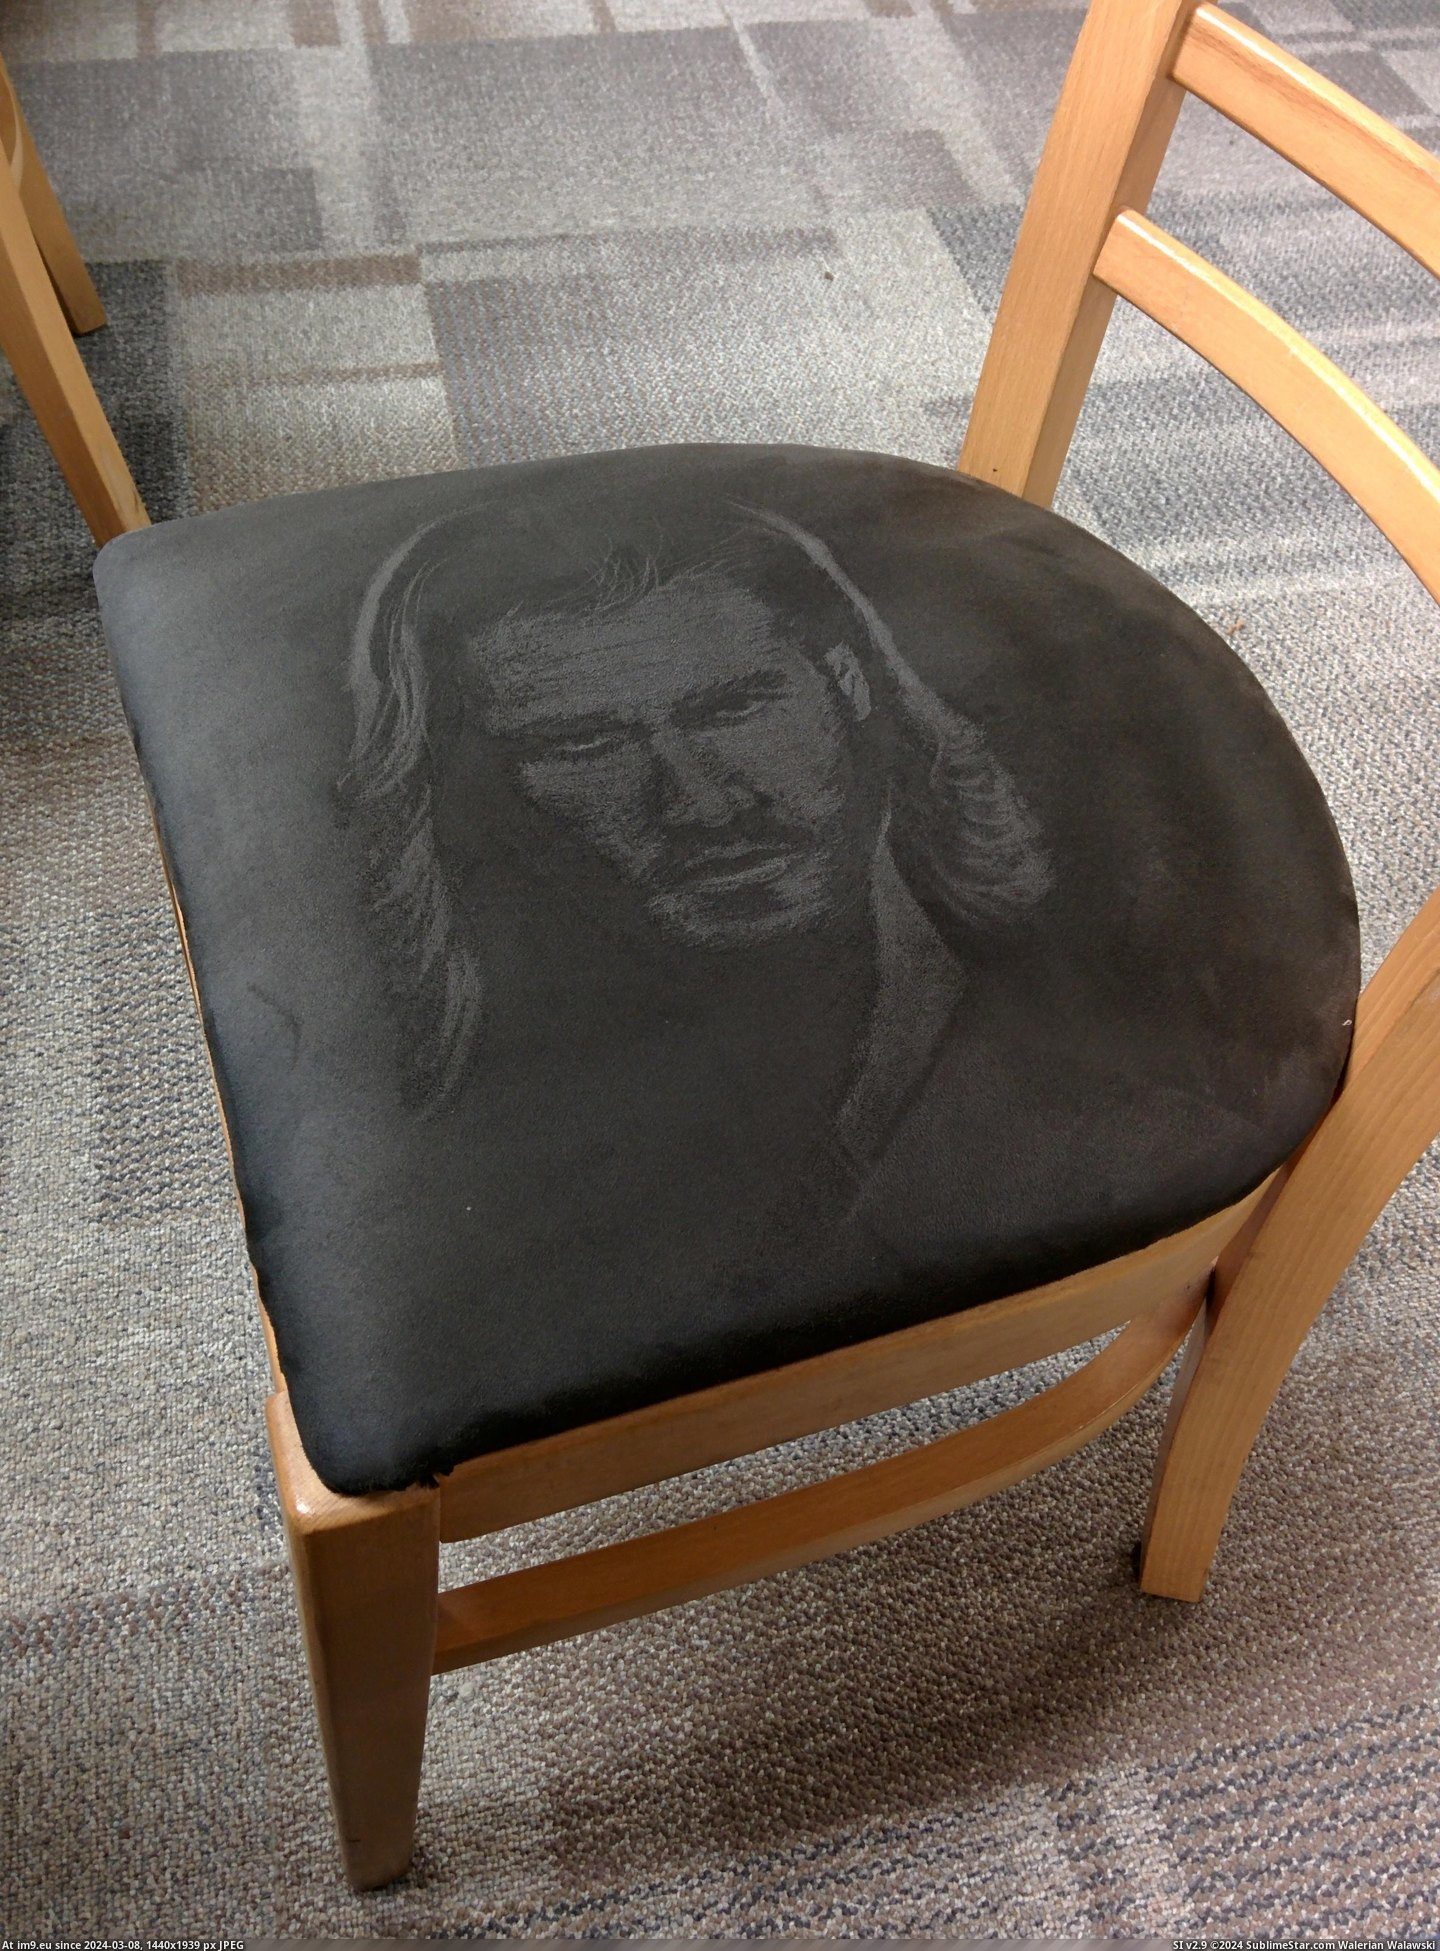 #Chair #Thor #Suede #Drew [Pics] Someone drew Thor on a suede chair Pic. (Изображение из альбом My r/PICS favs))